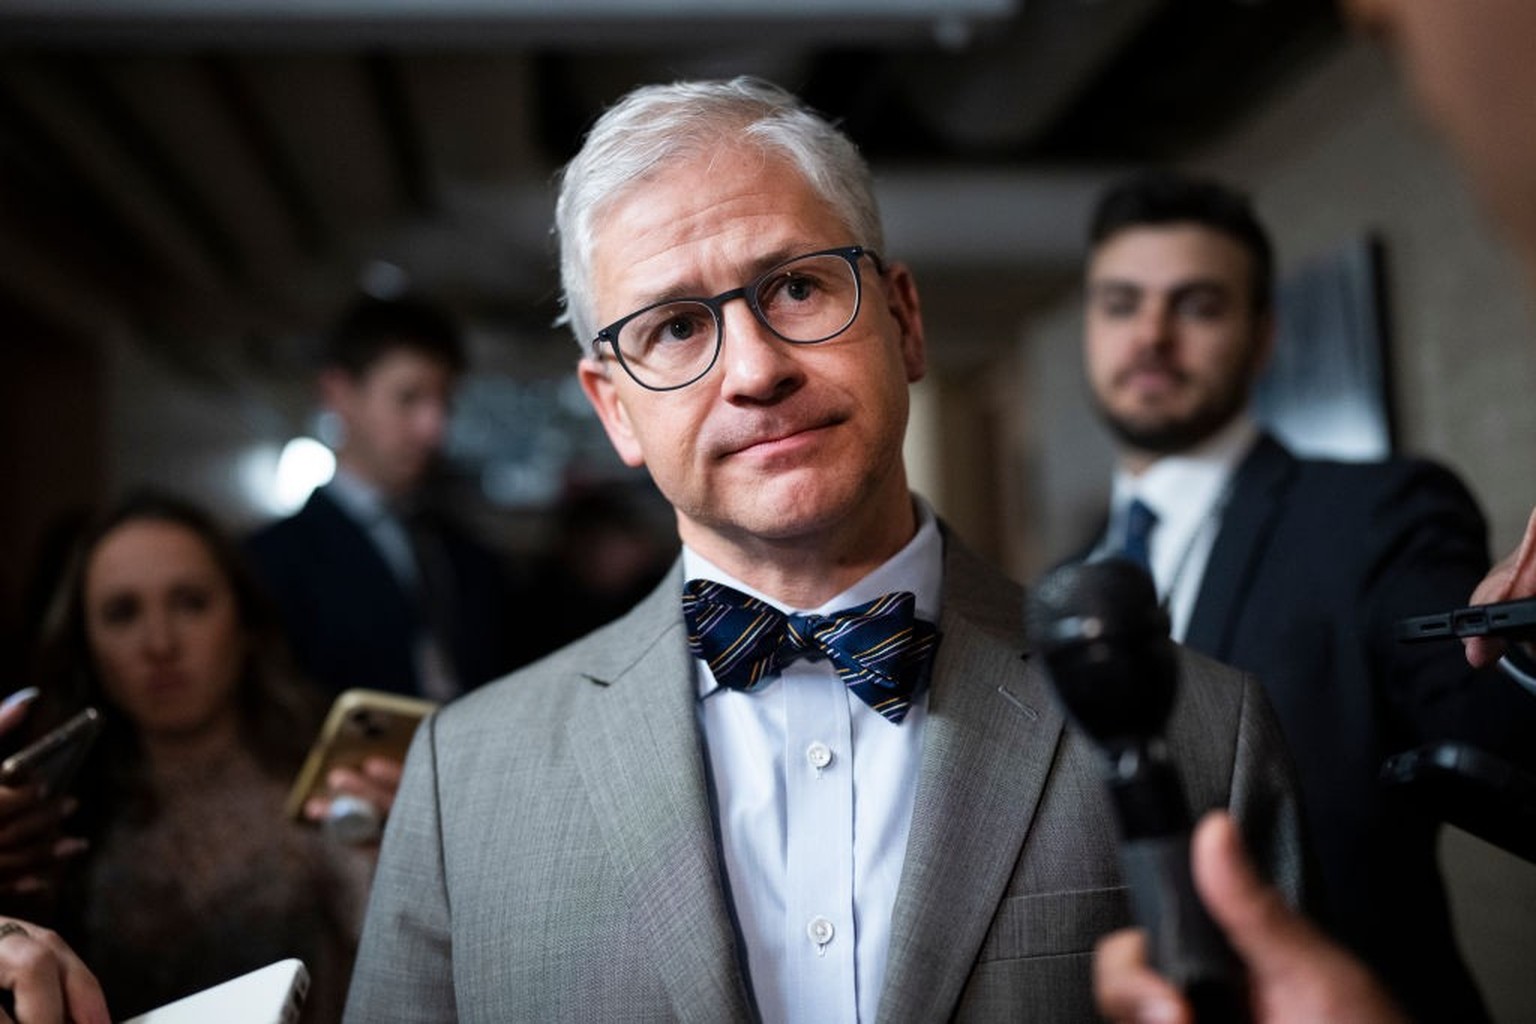 UNITED STATES - APRIL 18: Rep. Patrick McHenry, R-N.C., is seen after a meeting of the House Republican Conference on Tuesday, April 18, 2023. (Tom Williams/CQ-Roll Call, Inc via Getty Images)